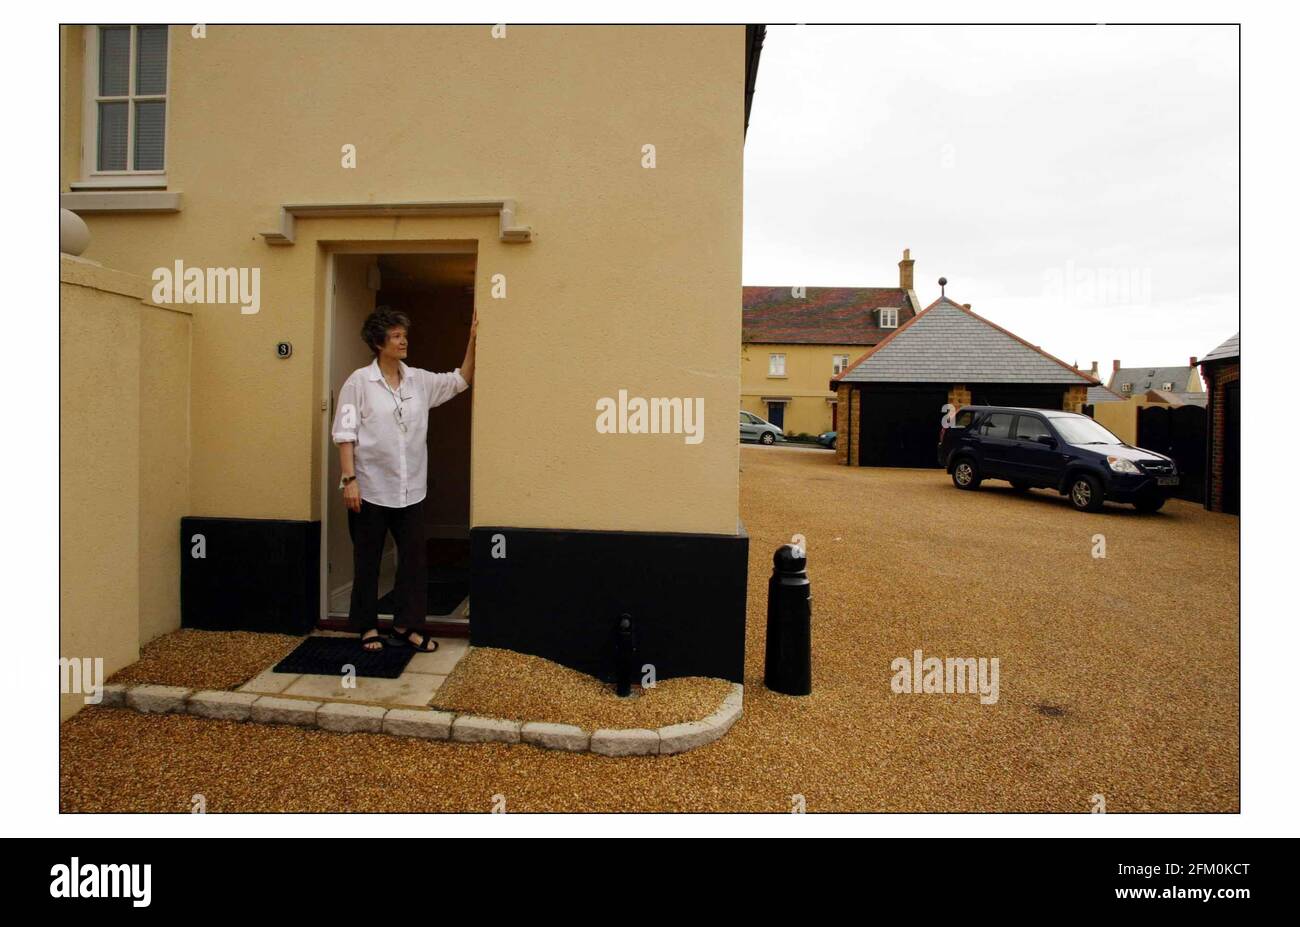 Glenys Jones resident of Poundbury who feels strongly about the planned development of Jubilee Court in Poundbury, Prince of Wales model village, Dorchester in Dorset.pic David Sandison 25/8/2004 Stock Photo